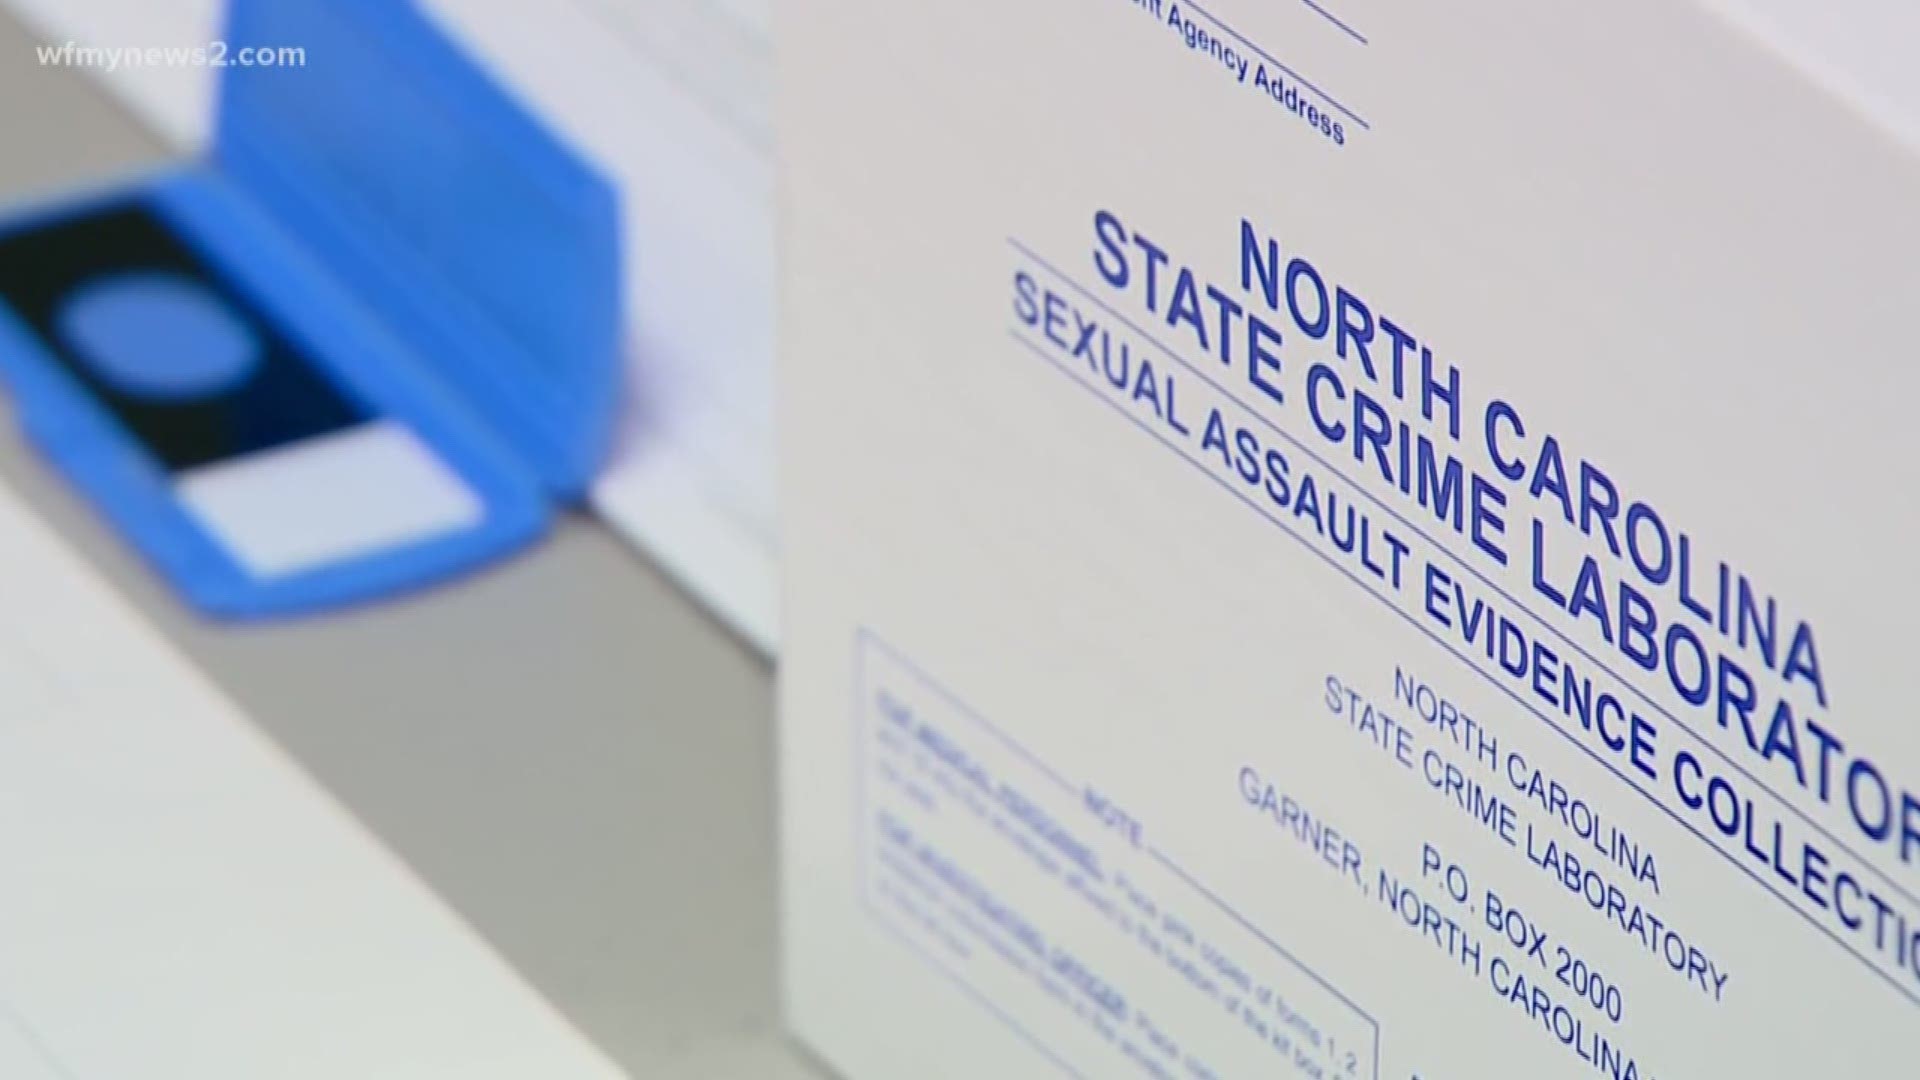 The state of North Carolina launched a new system to track the status of rape kits. The hope is that it can help cut down on the rape kit backlog.